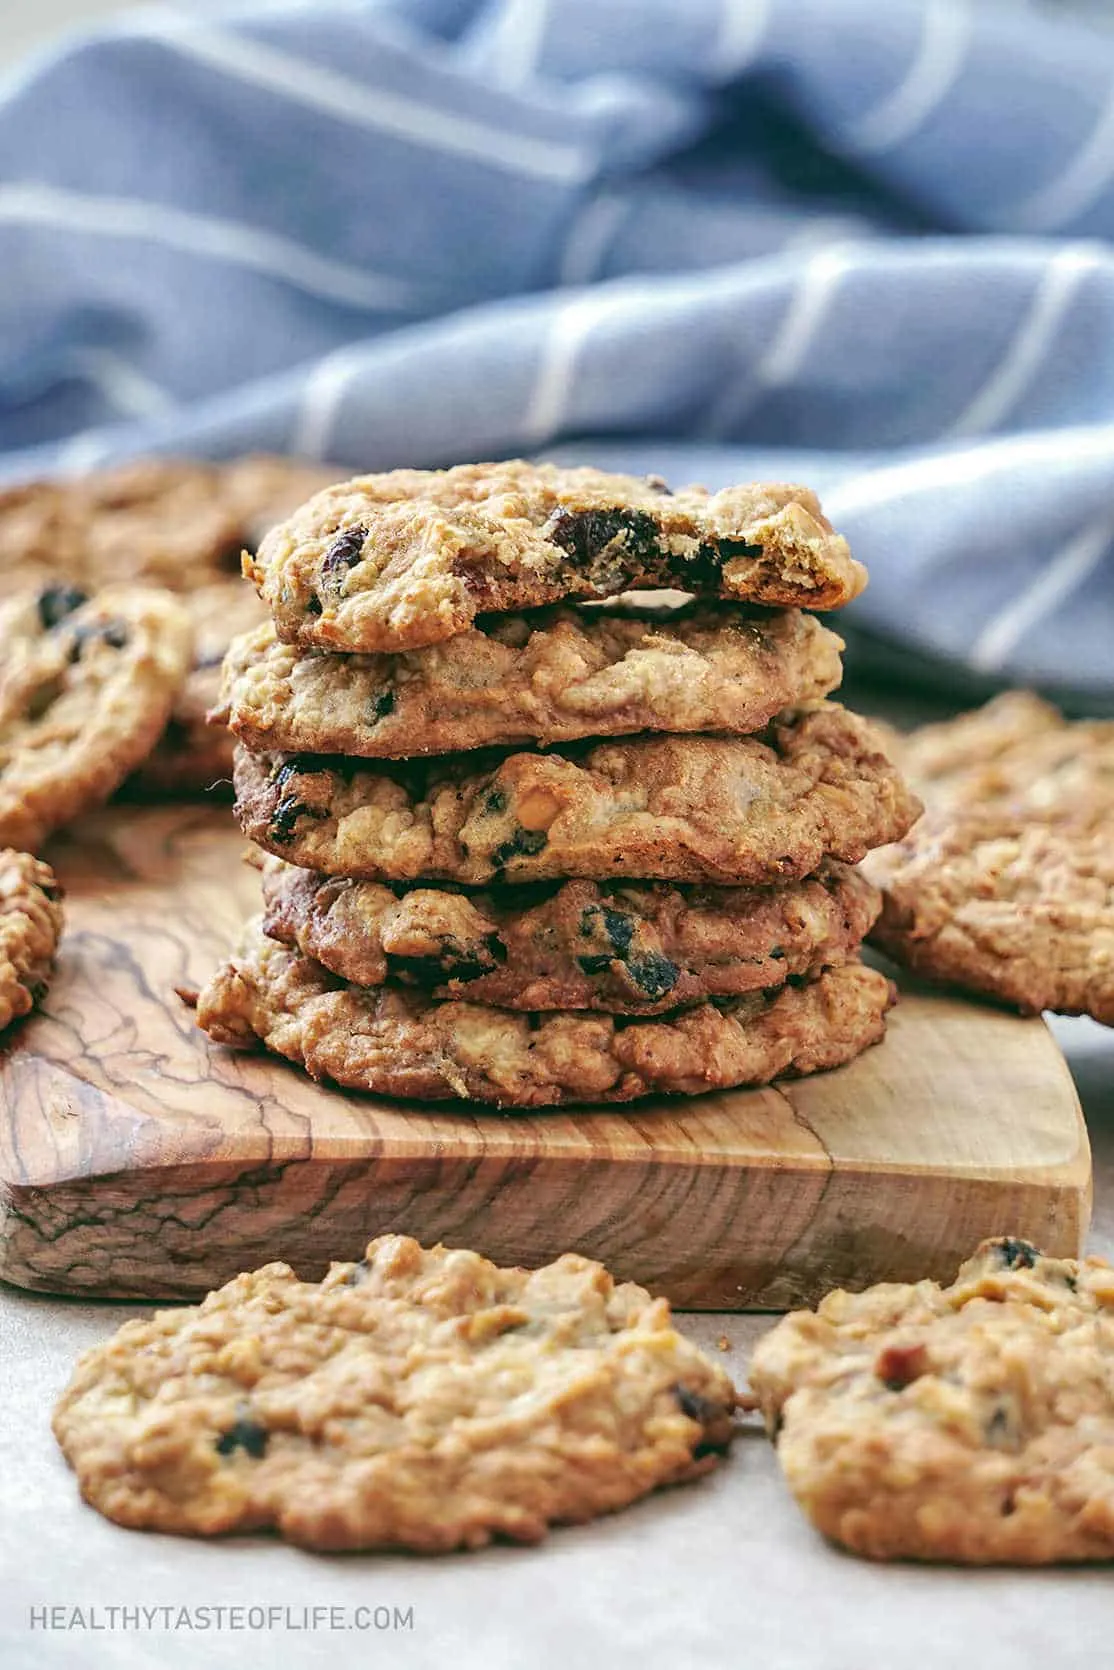 Oatmeal cookies with applesauce and dried fruit without butter stacked.
